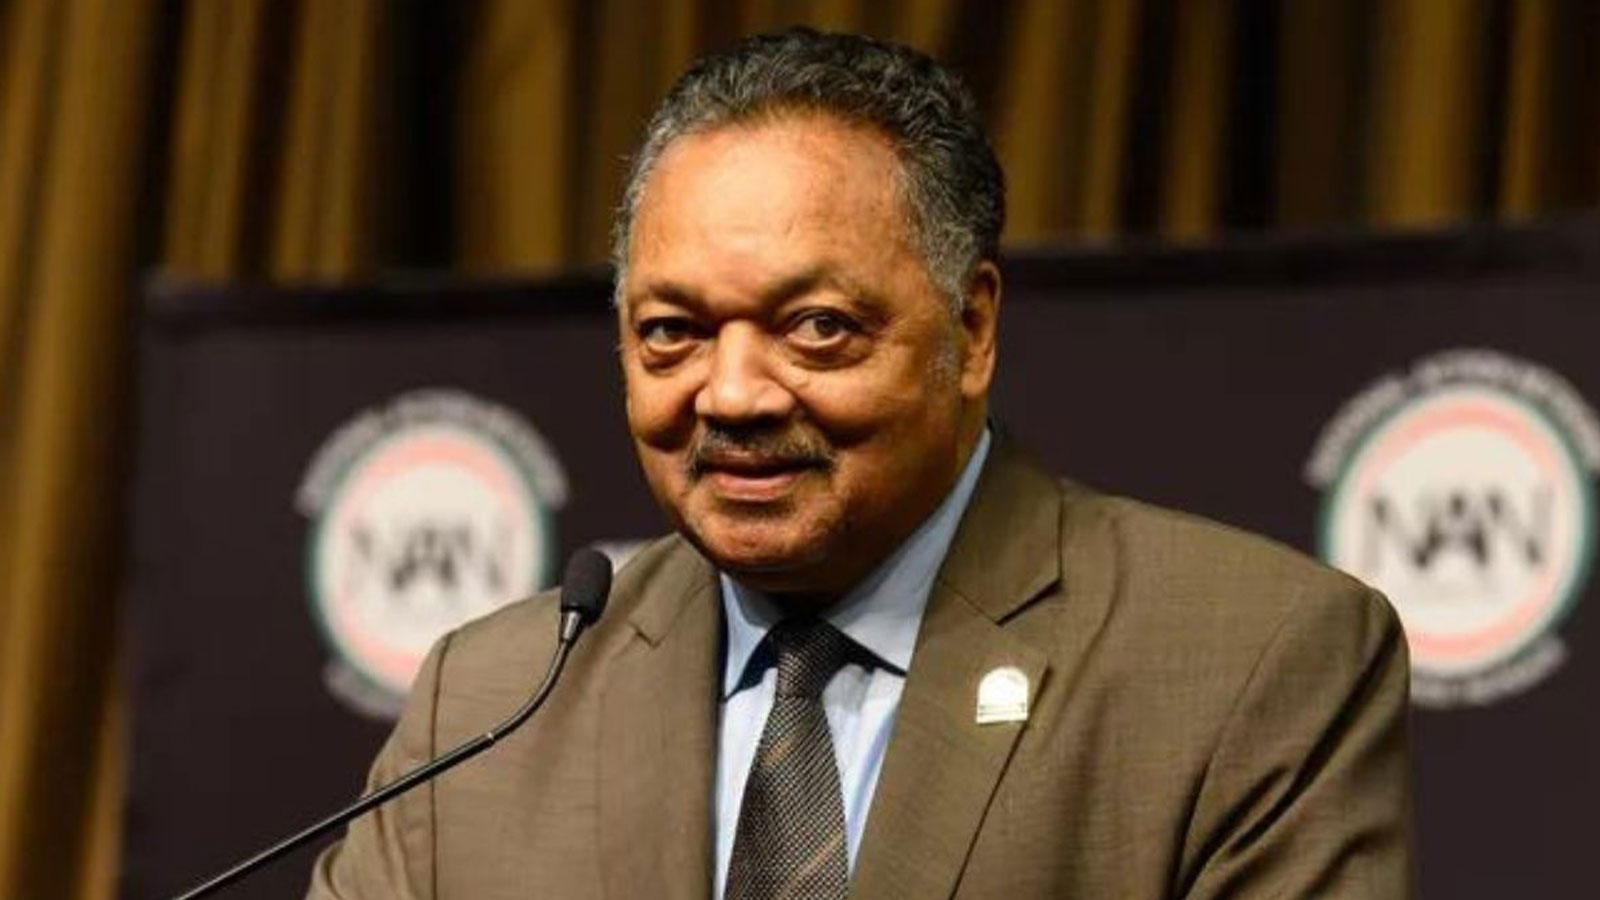 Jesse Jackson: How we see the past reflects how we live in the present